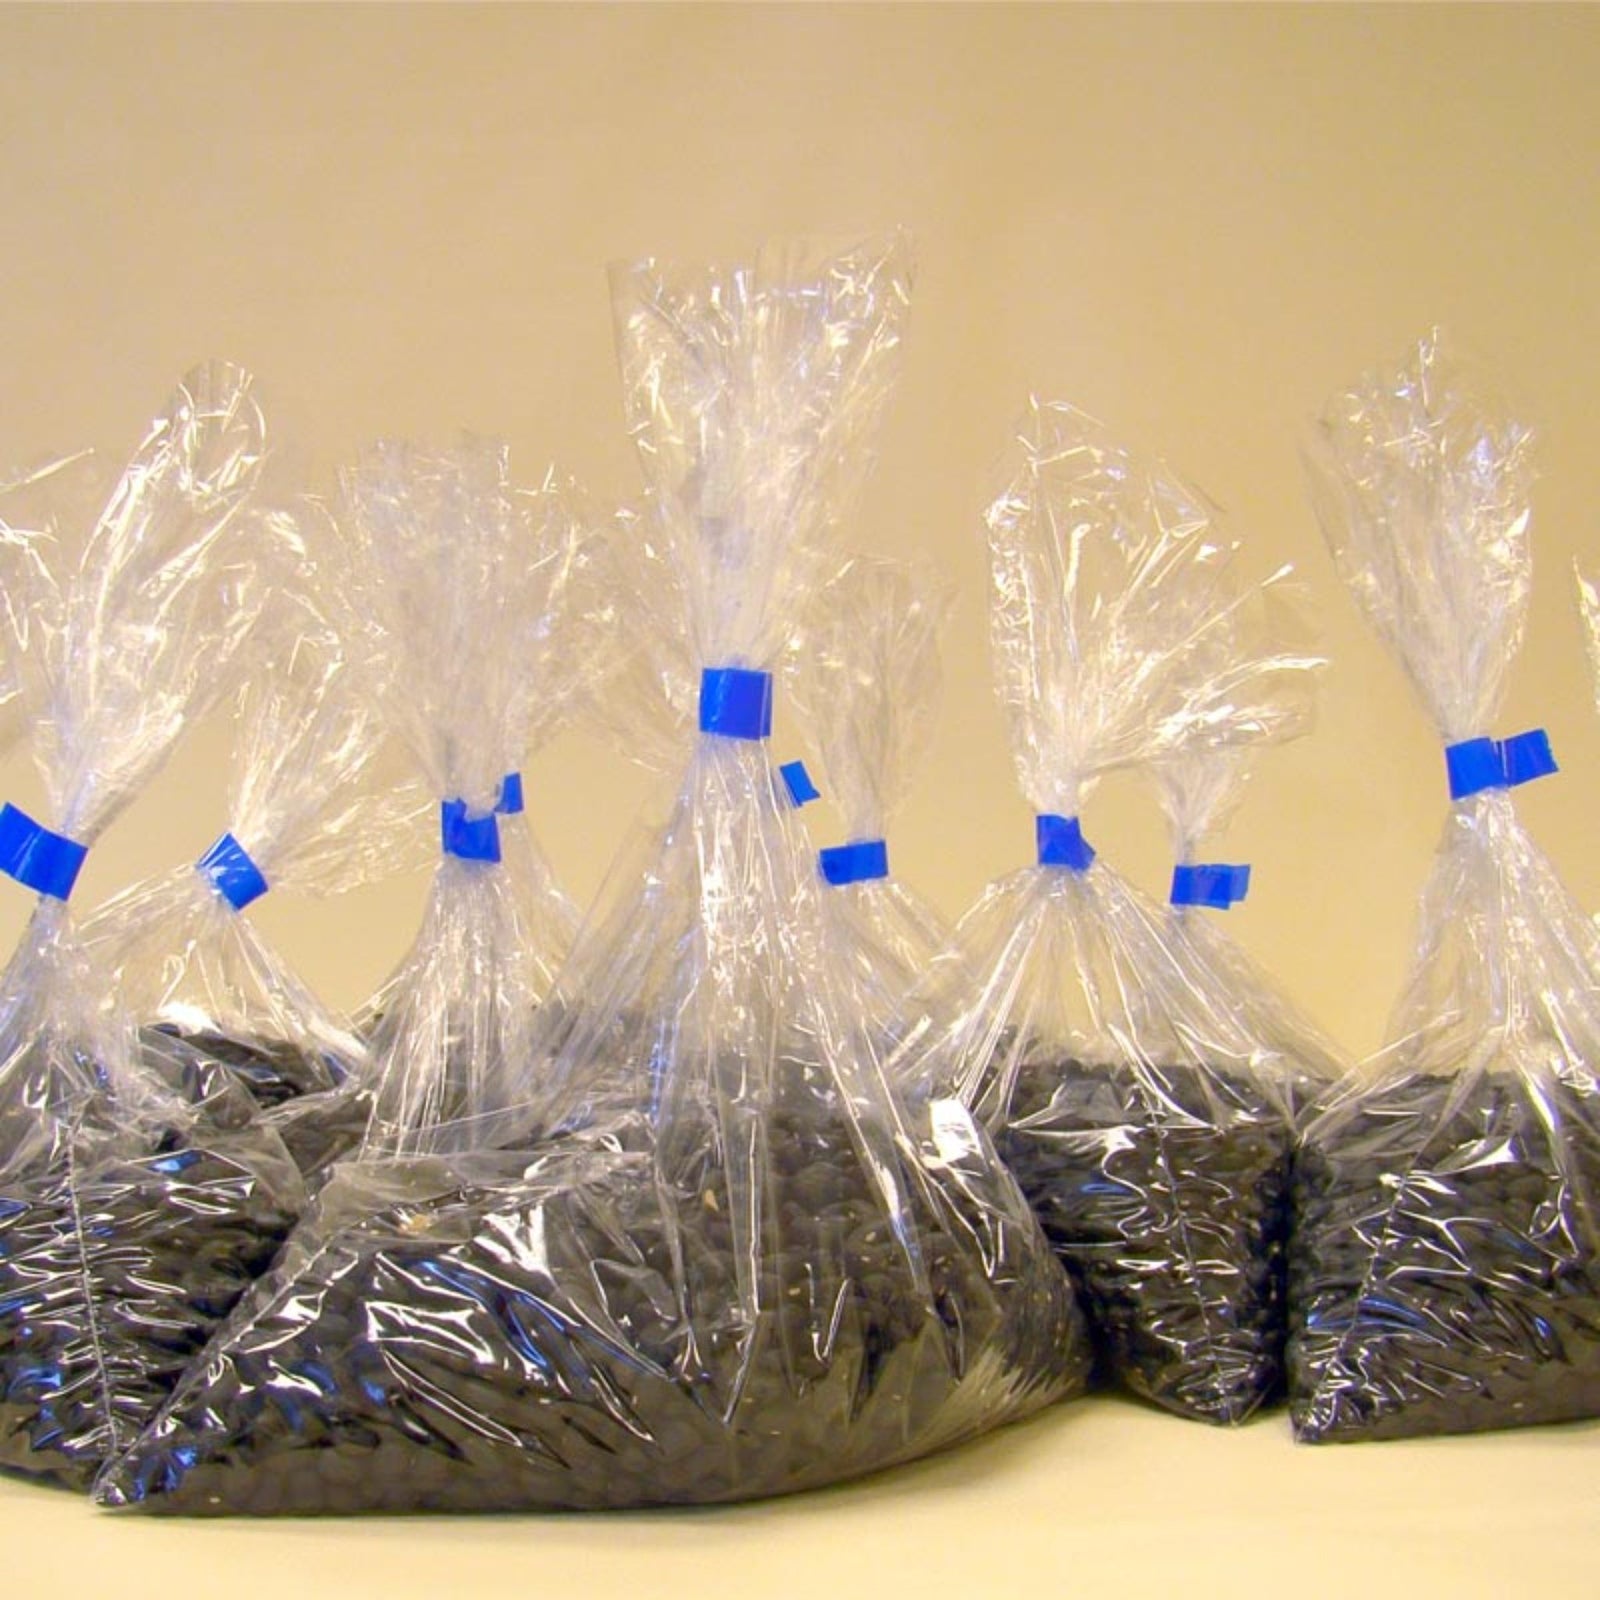 Several plastic bags filled with black dry beans closed with blue self adhesive tape after using the stainless steel manual bag neck taper